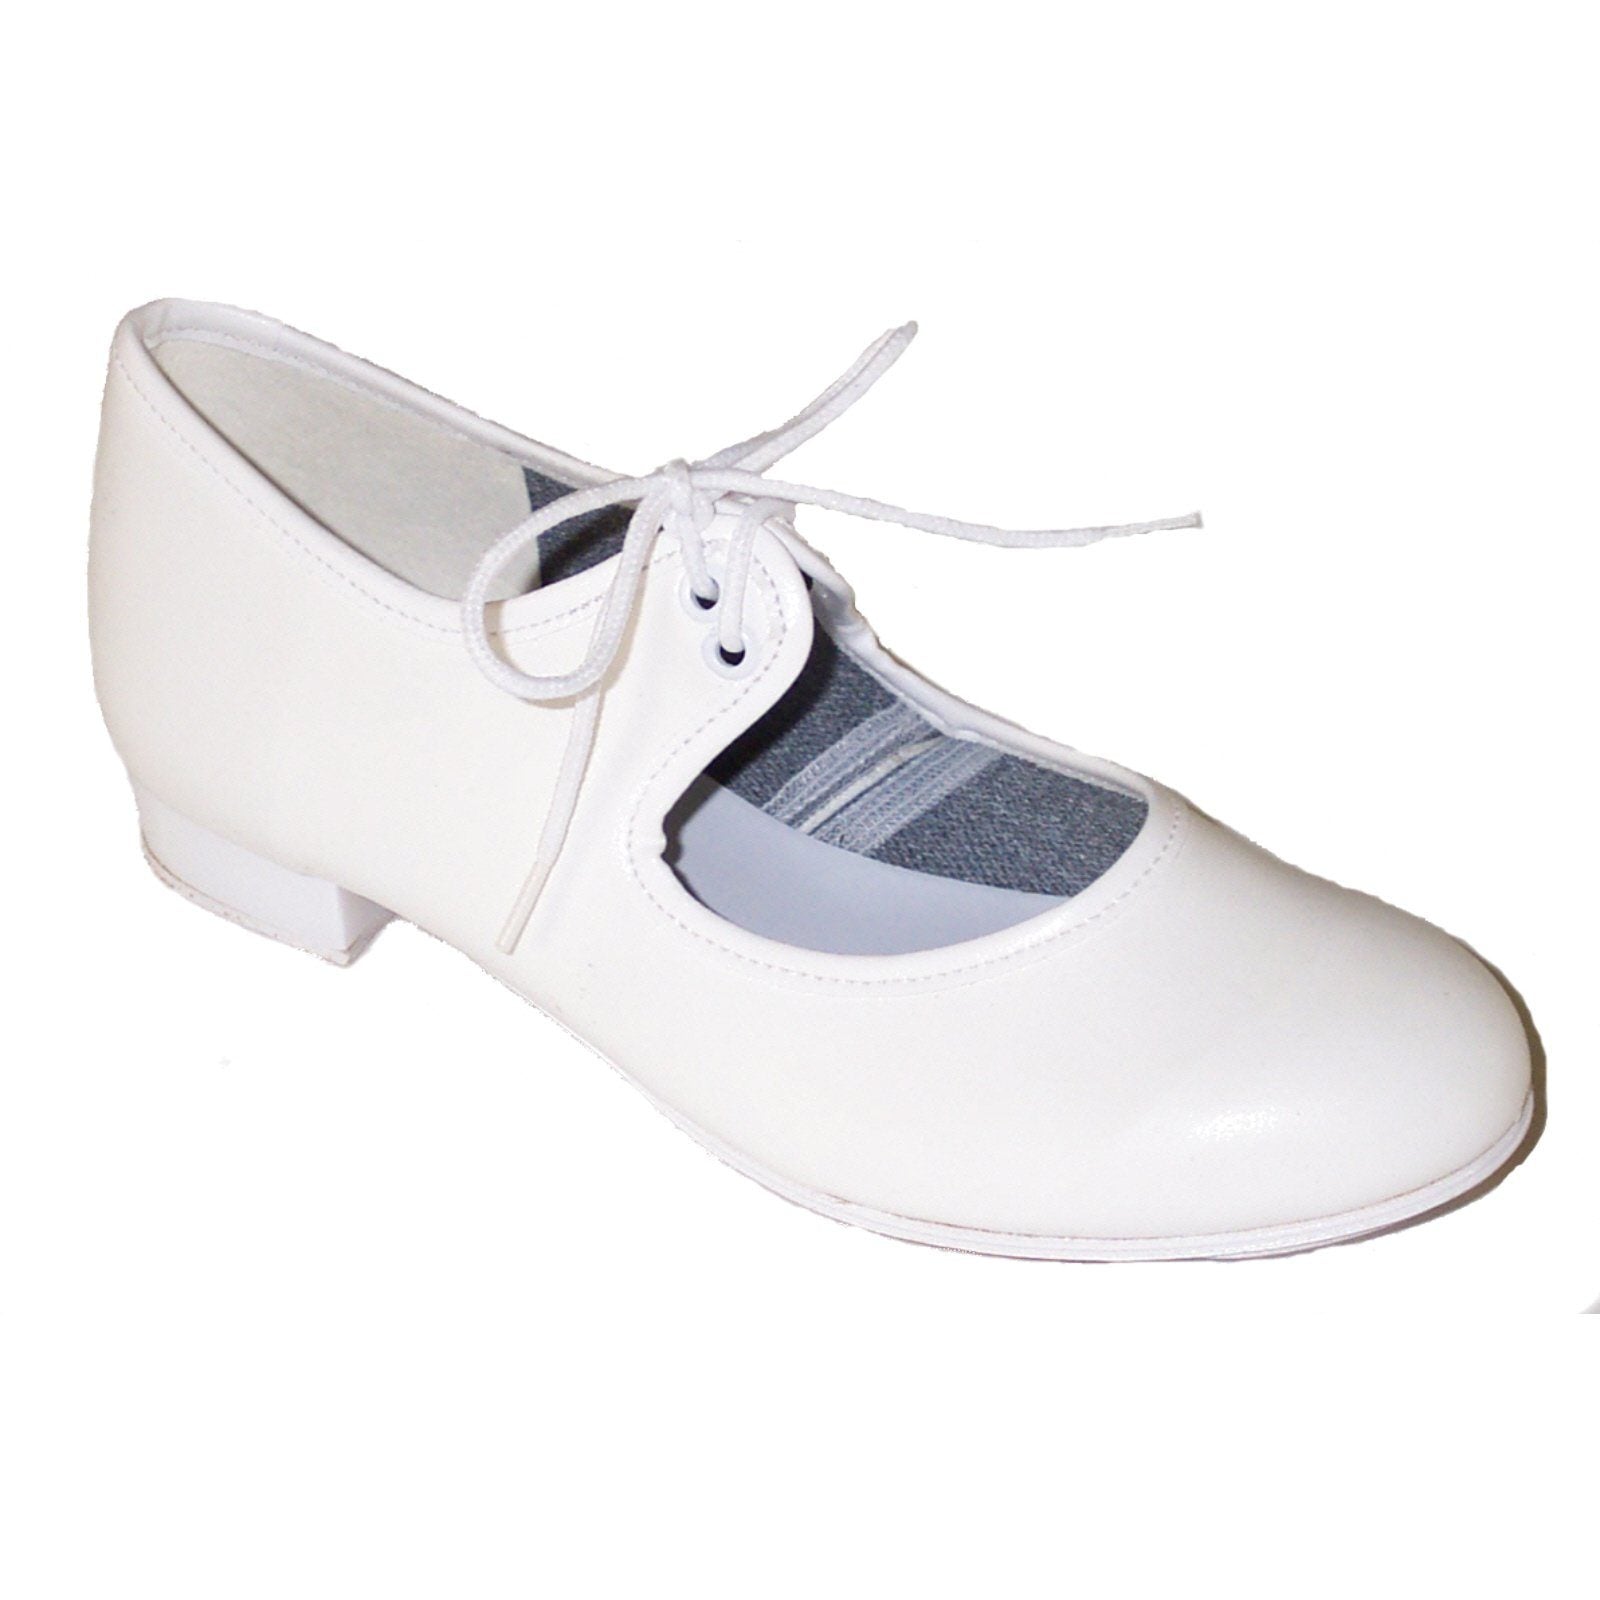 WHITE PU TAP SHOES WITH A LOW HEEL Dance Shoes Dancers World 